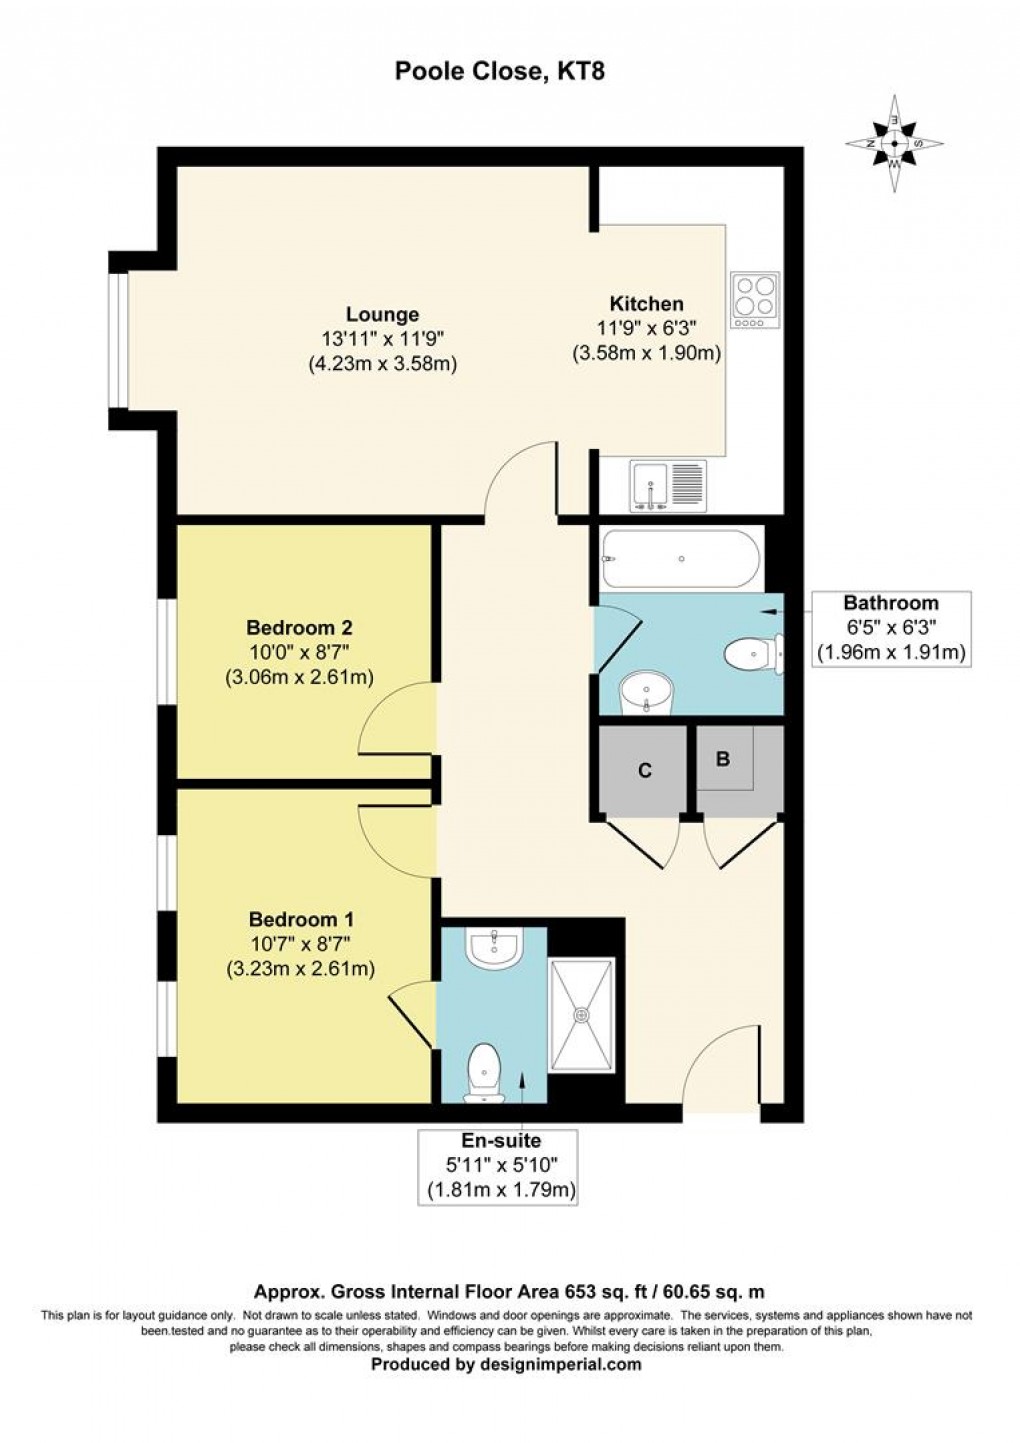 Floorplan for Pool Close, West Molesey